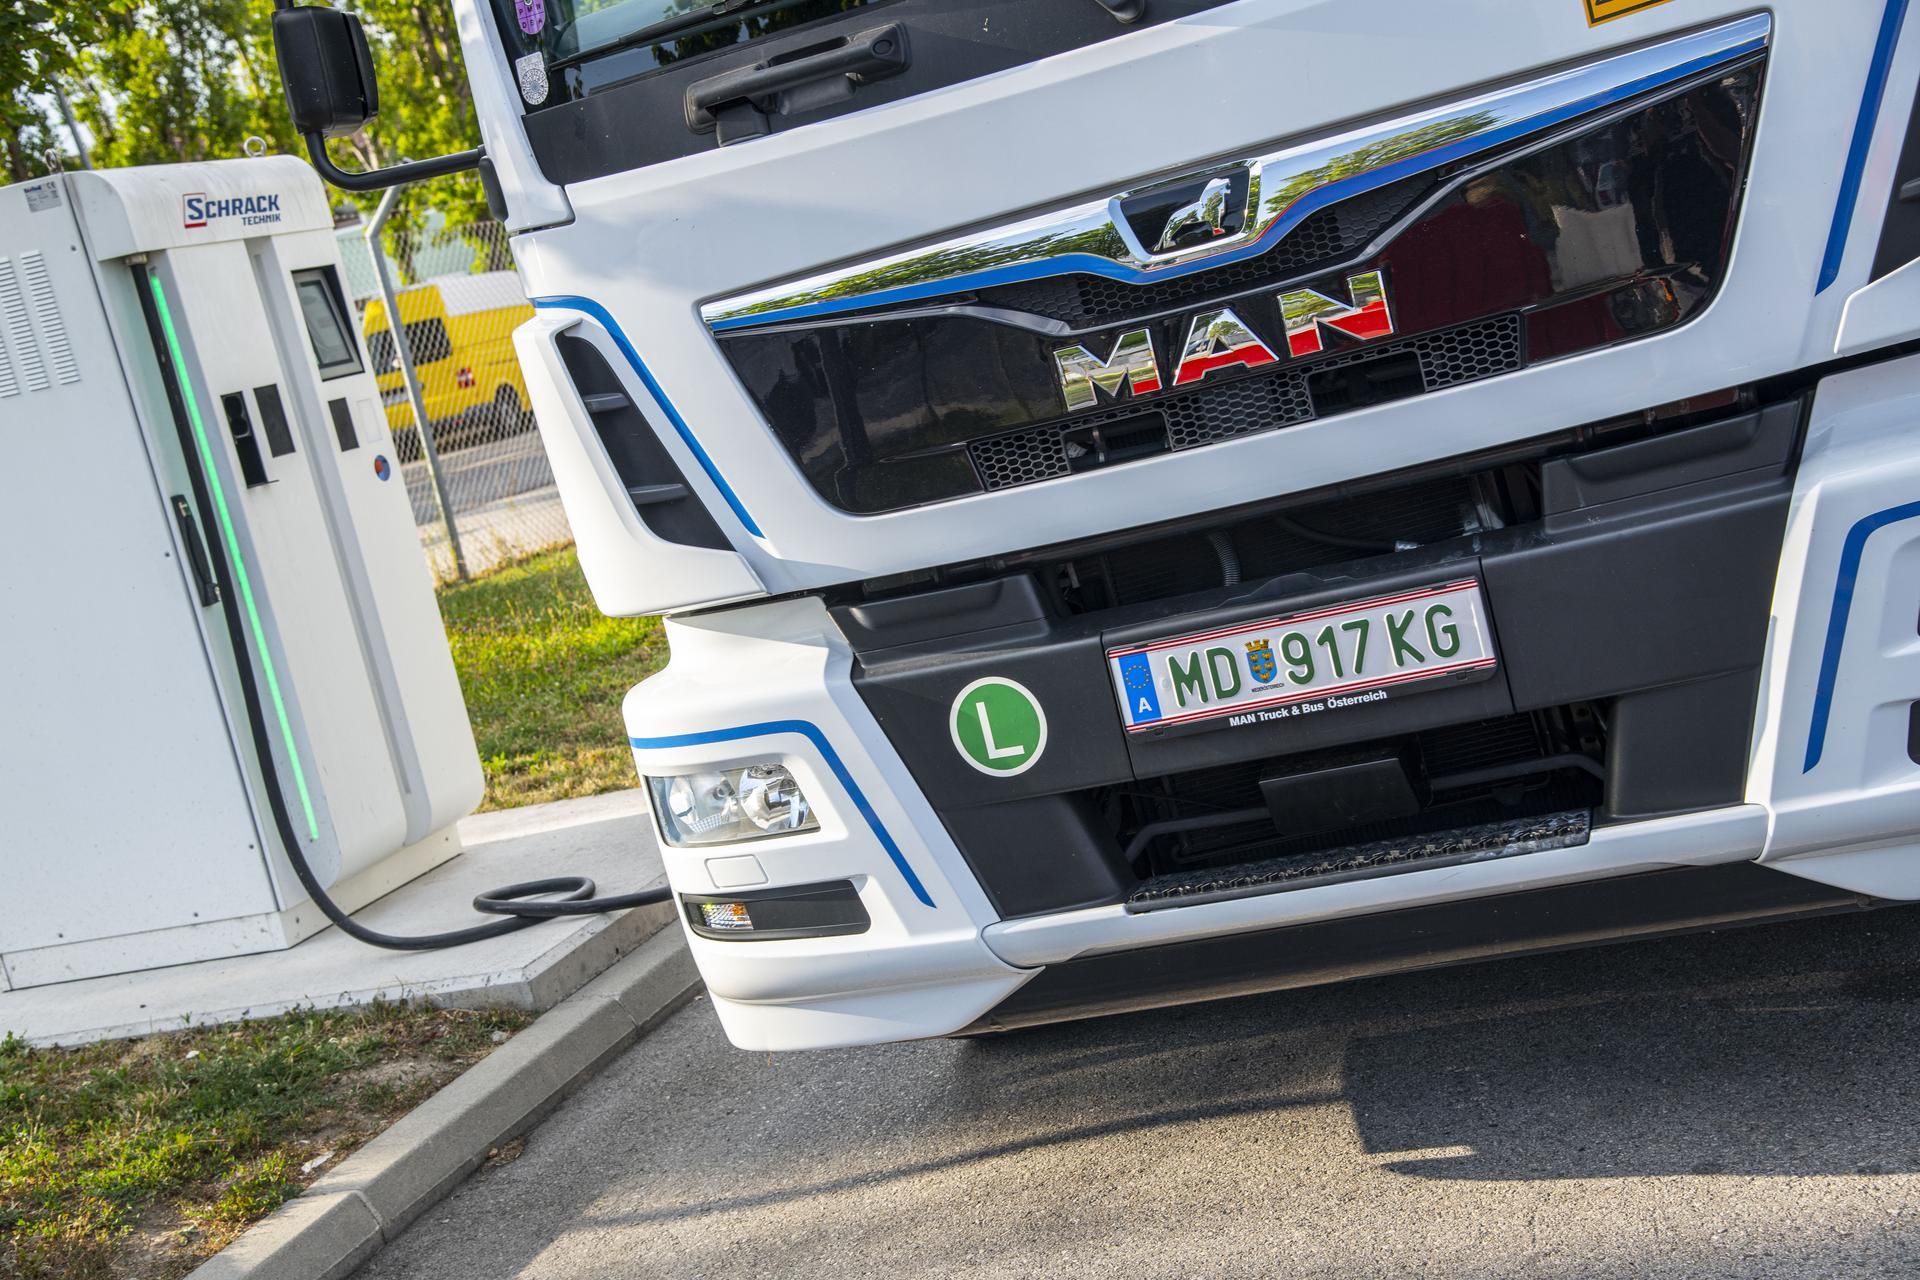 Producing e-trucks and e-buses powered by batteries is a crucial component in the decarbonization of transport.